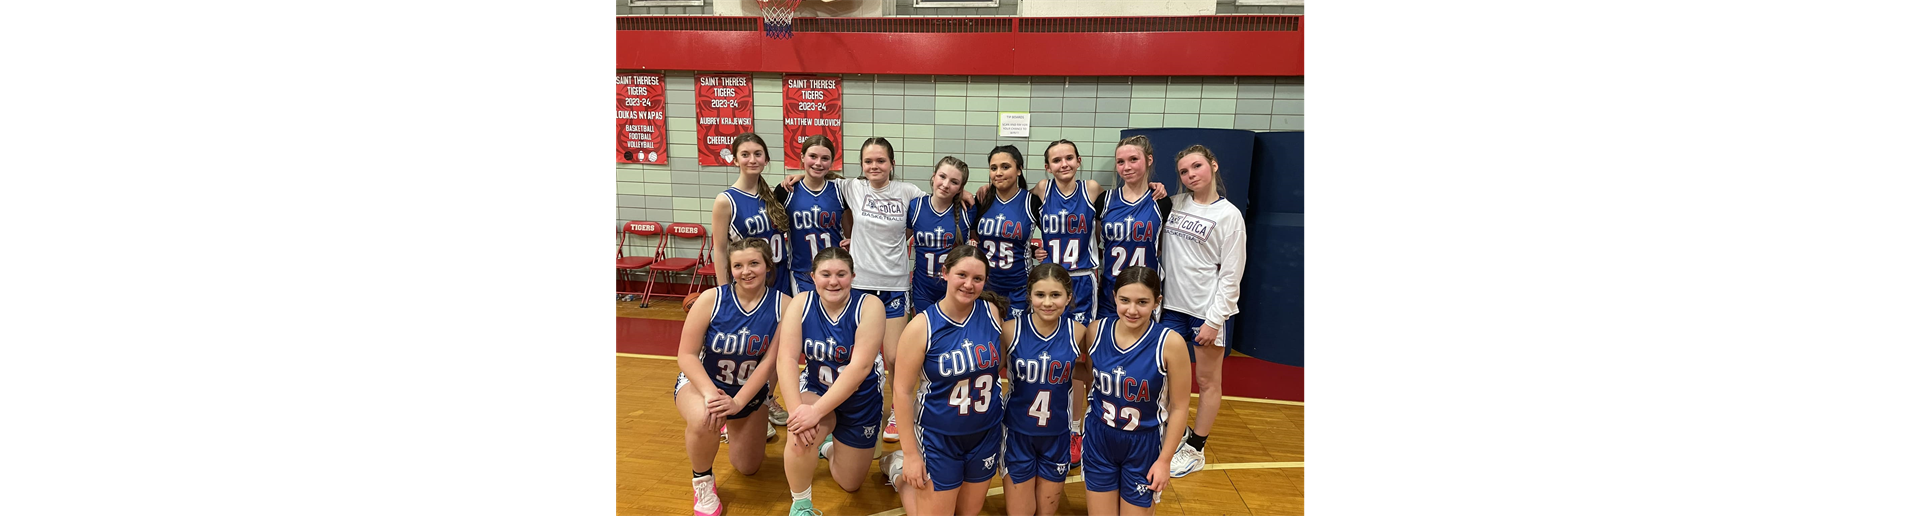 Girls Varsity wins Section, clinches home court throughout playoffs